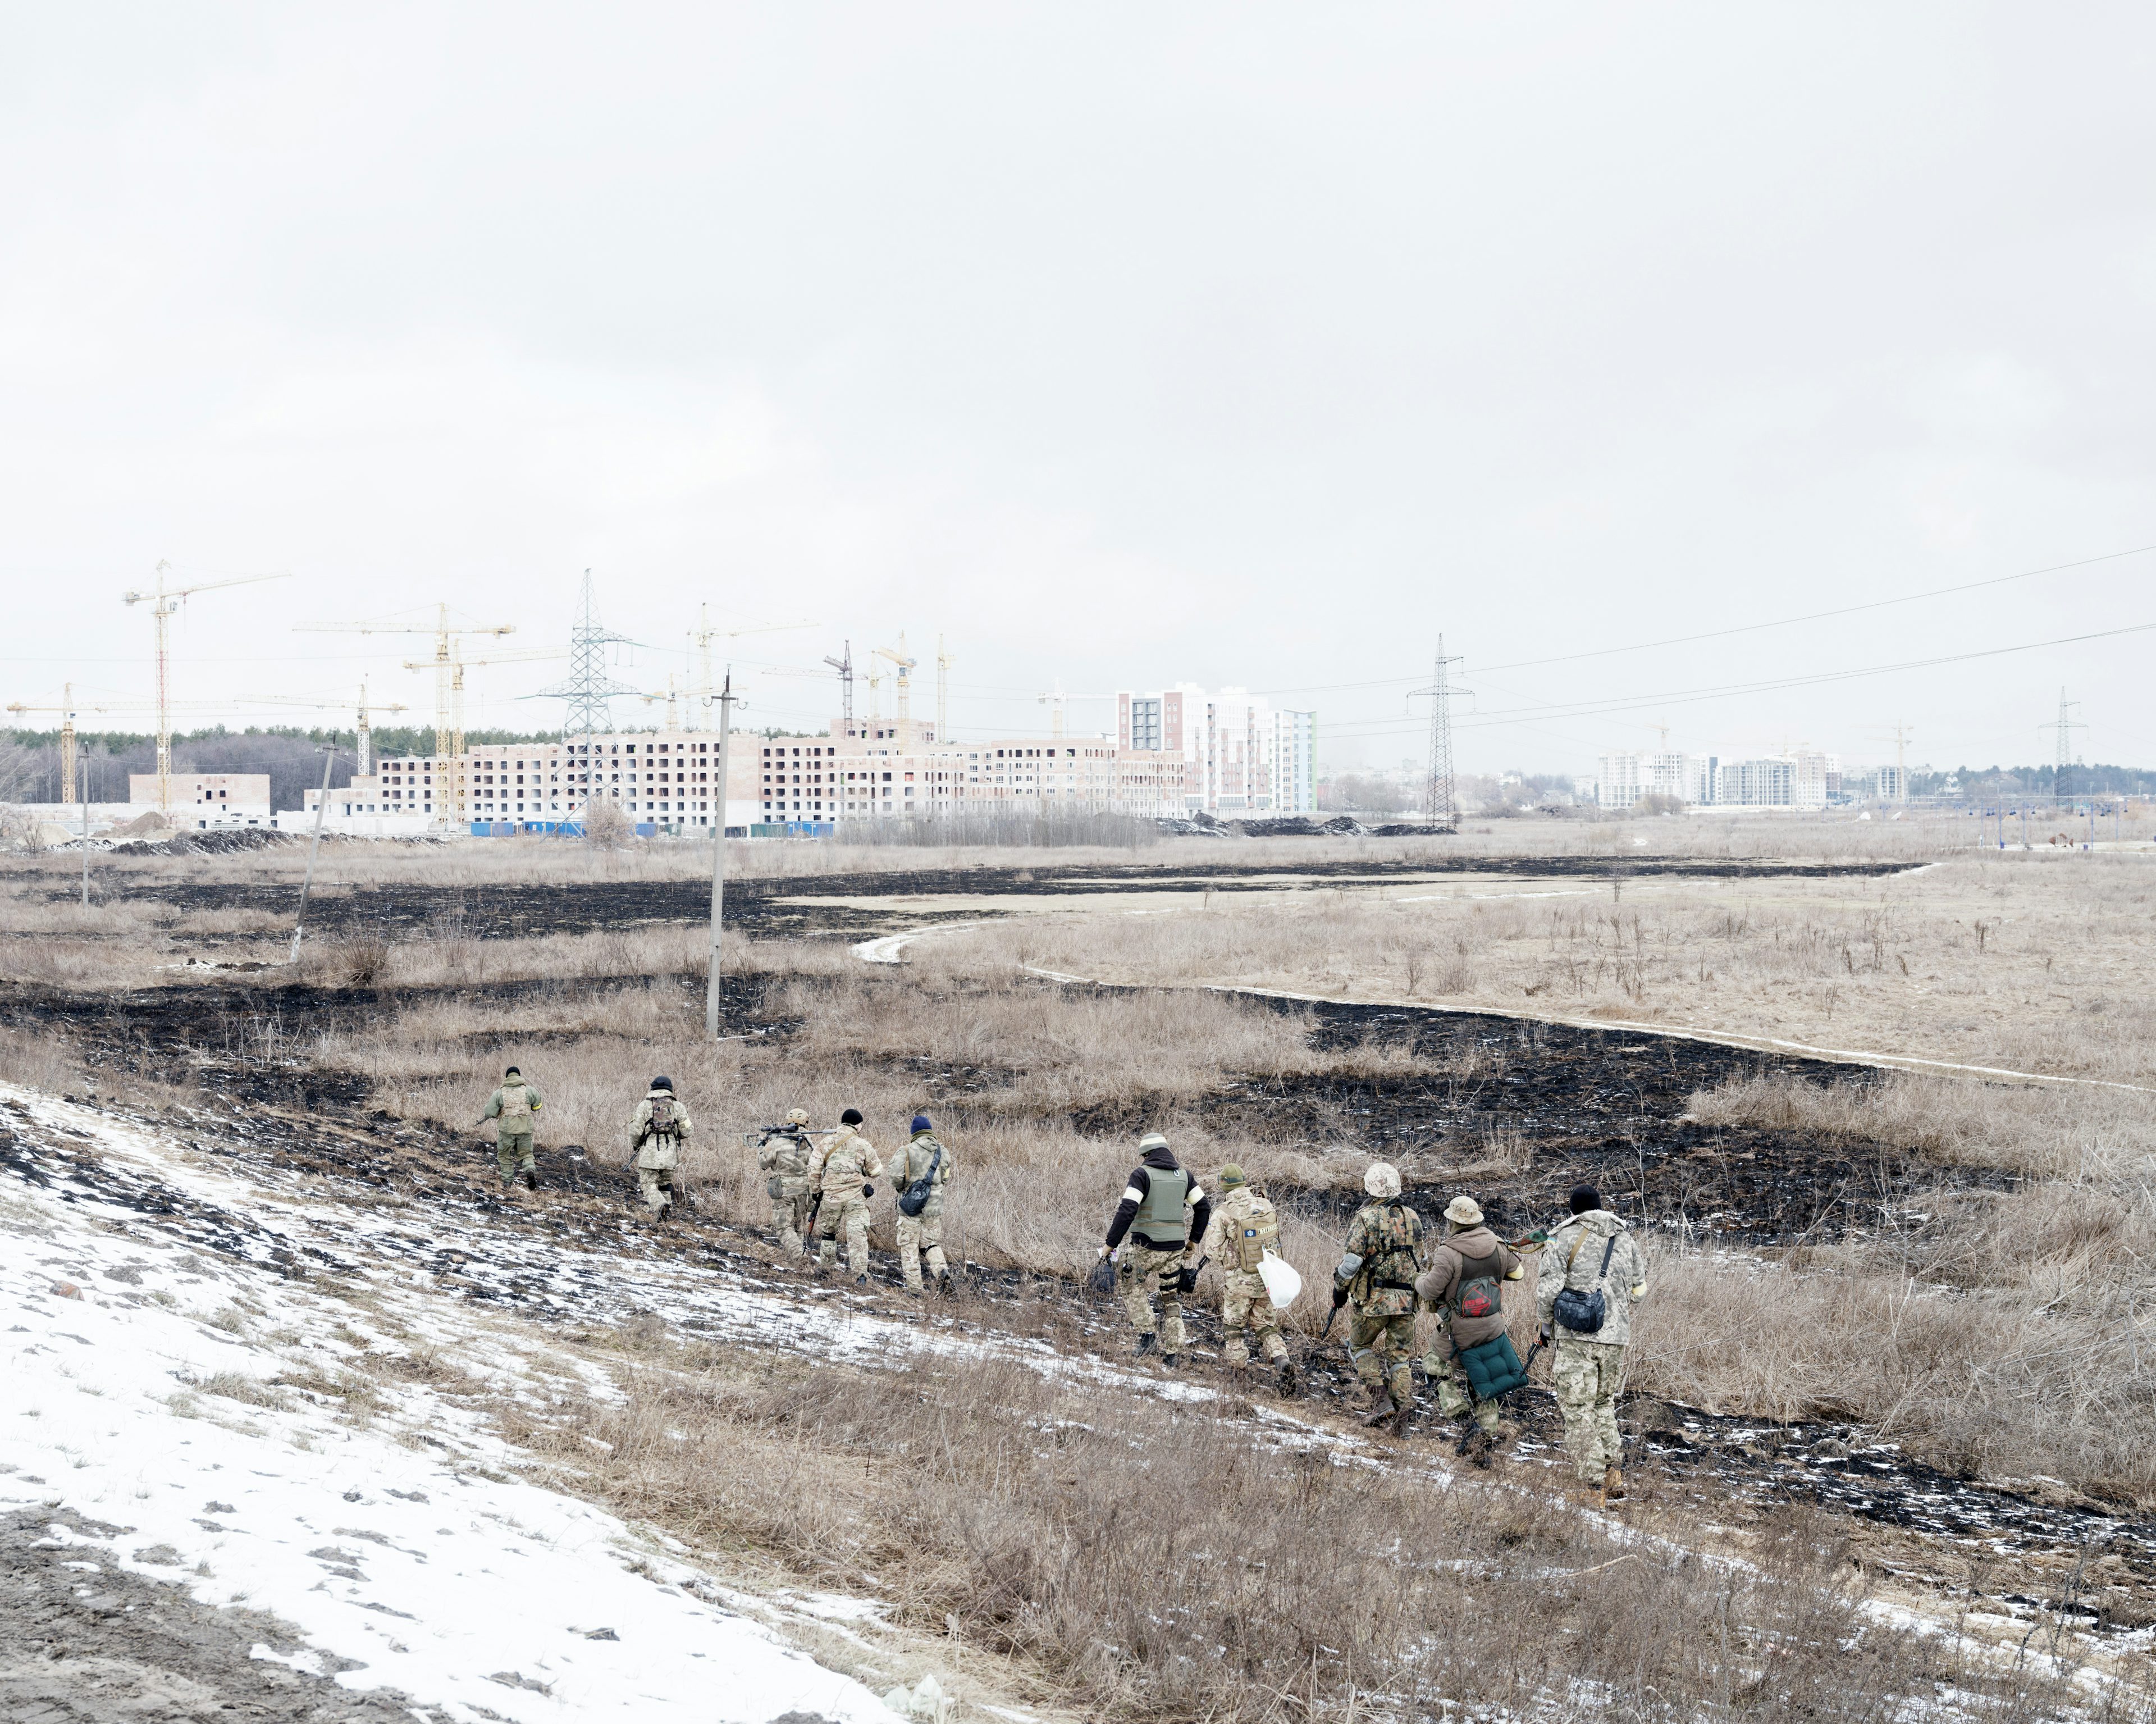 UKRAINE. Irpin. 8 March 2022. Soldiers of the Ukrainian army move towards the front line. Photo by Lorenzo Meloni